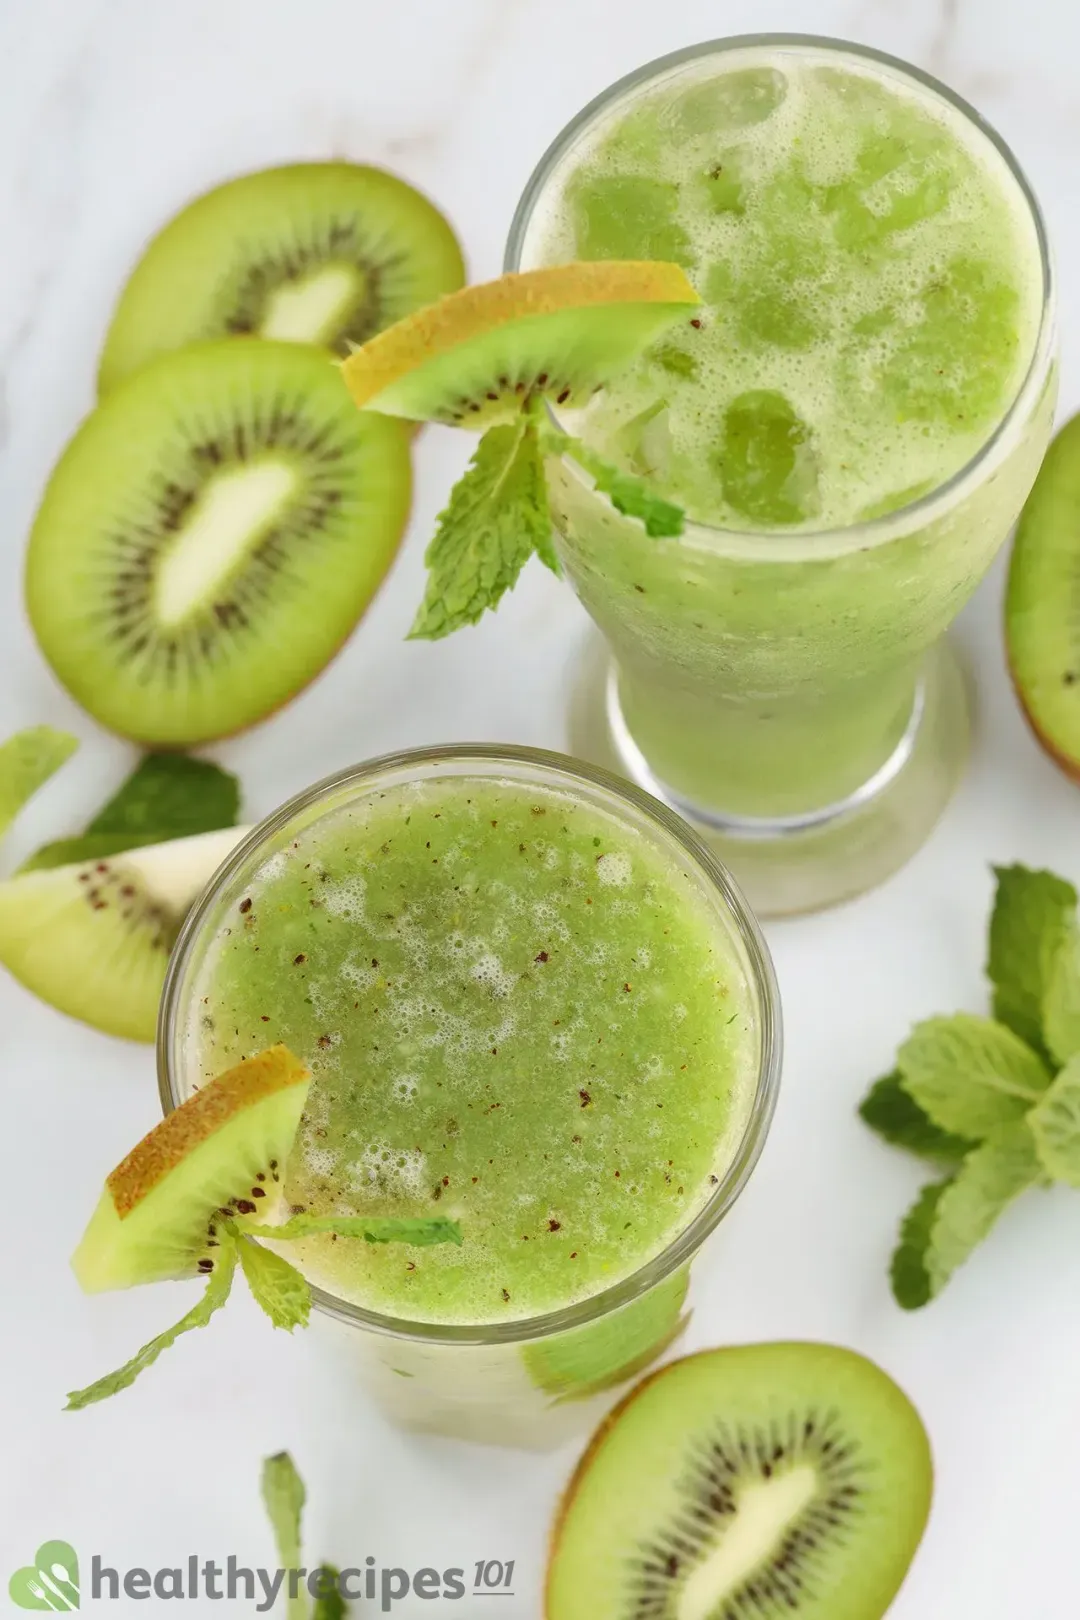 Two iced glasses of kiwi juice, garnished with lots of kiwis in different shapes